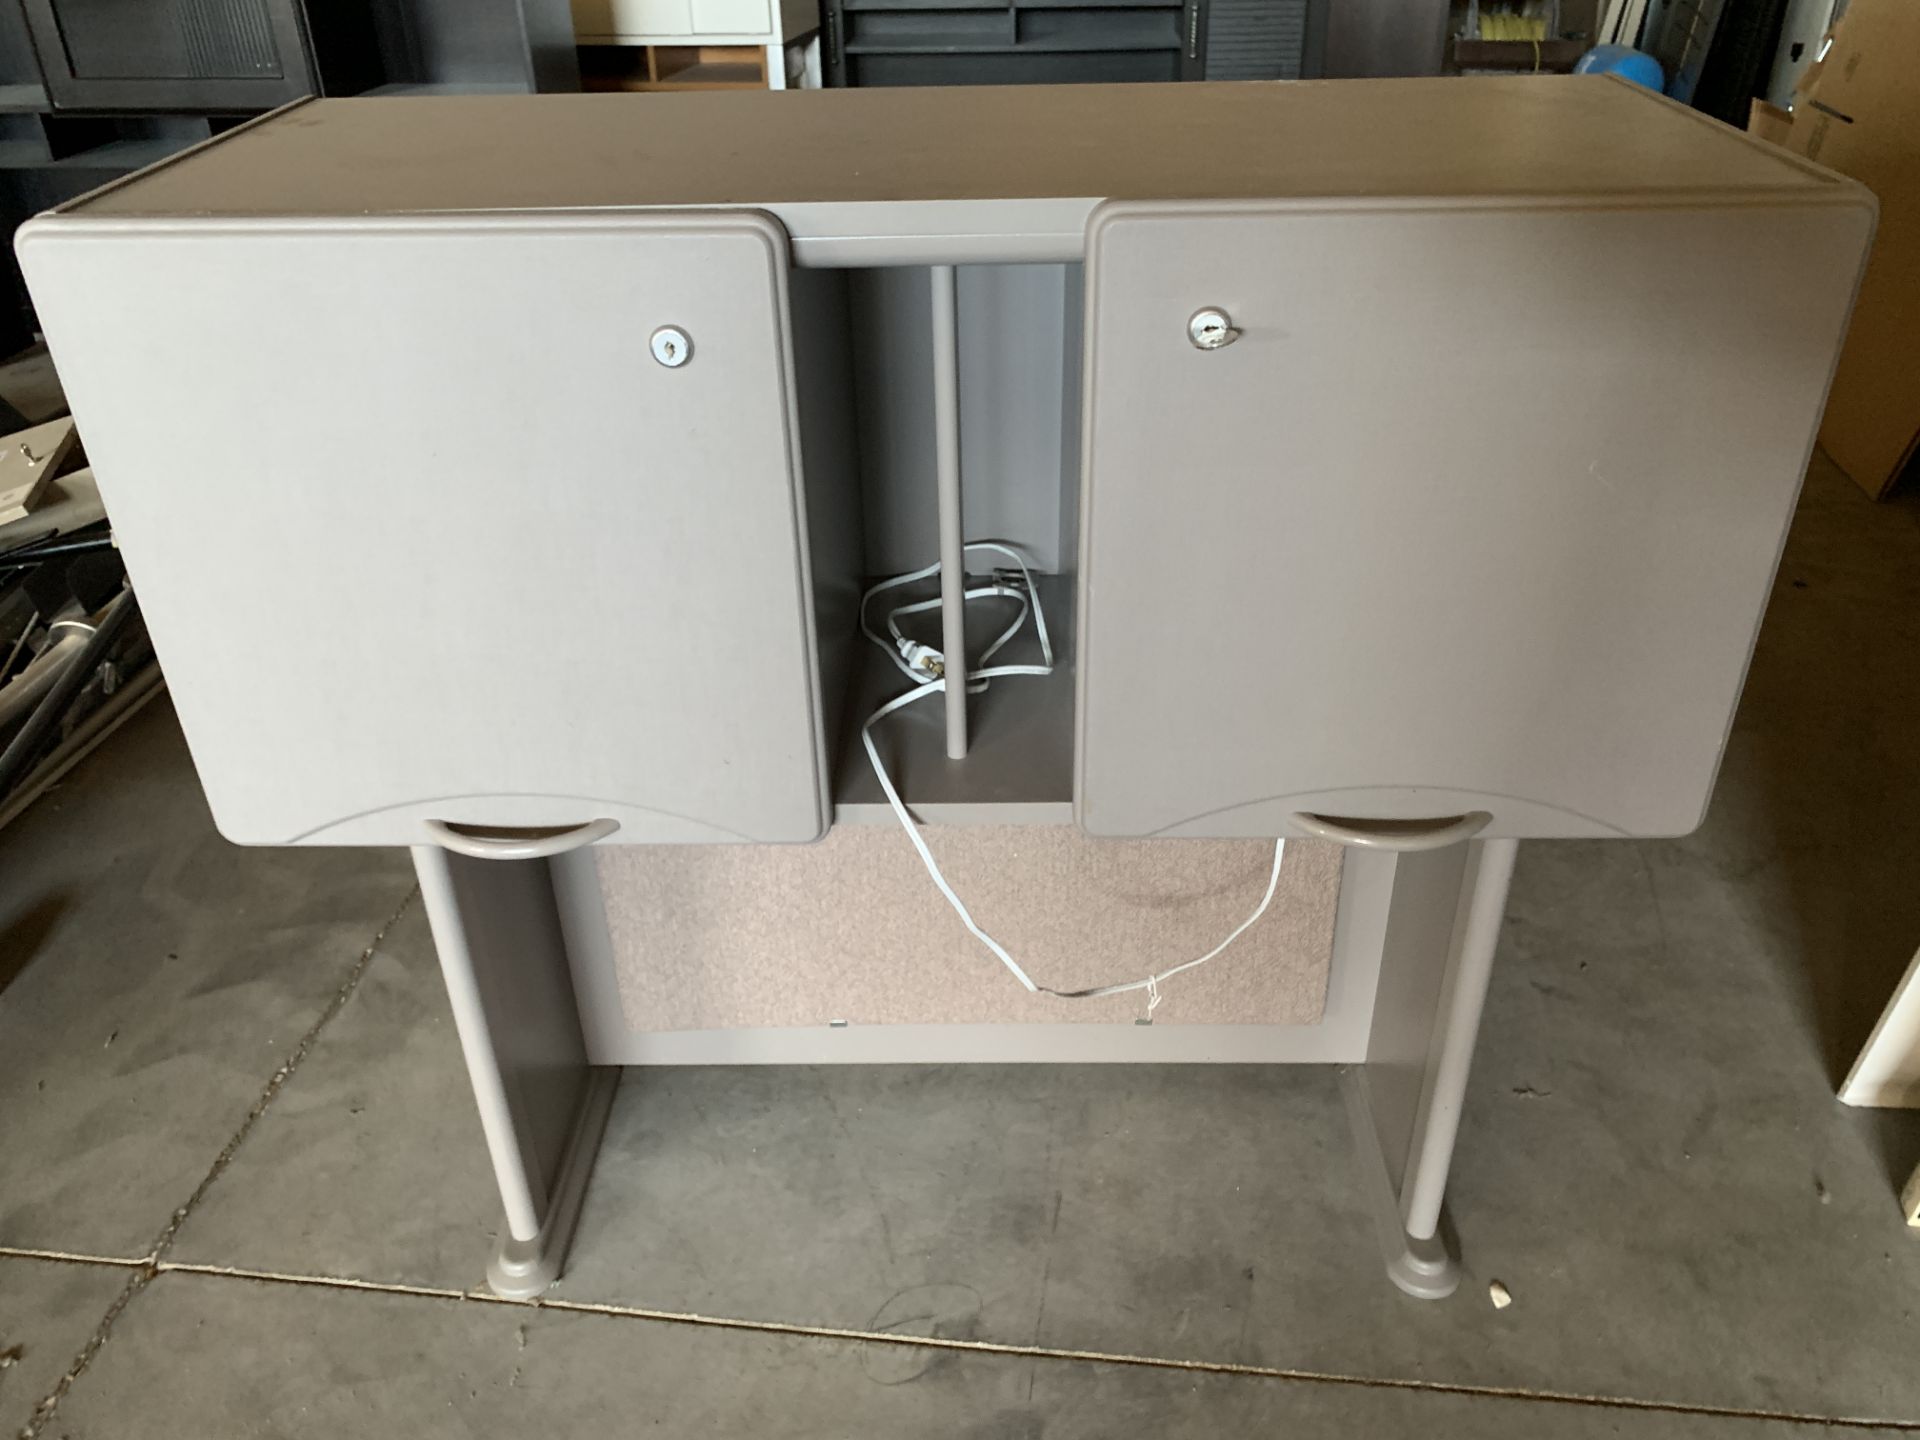 Office Desk Topper with Shelves and Storage **If won, available for Las Vegas pick up only